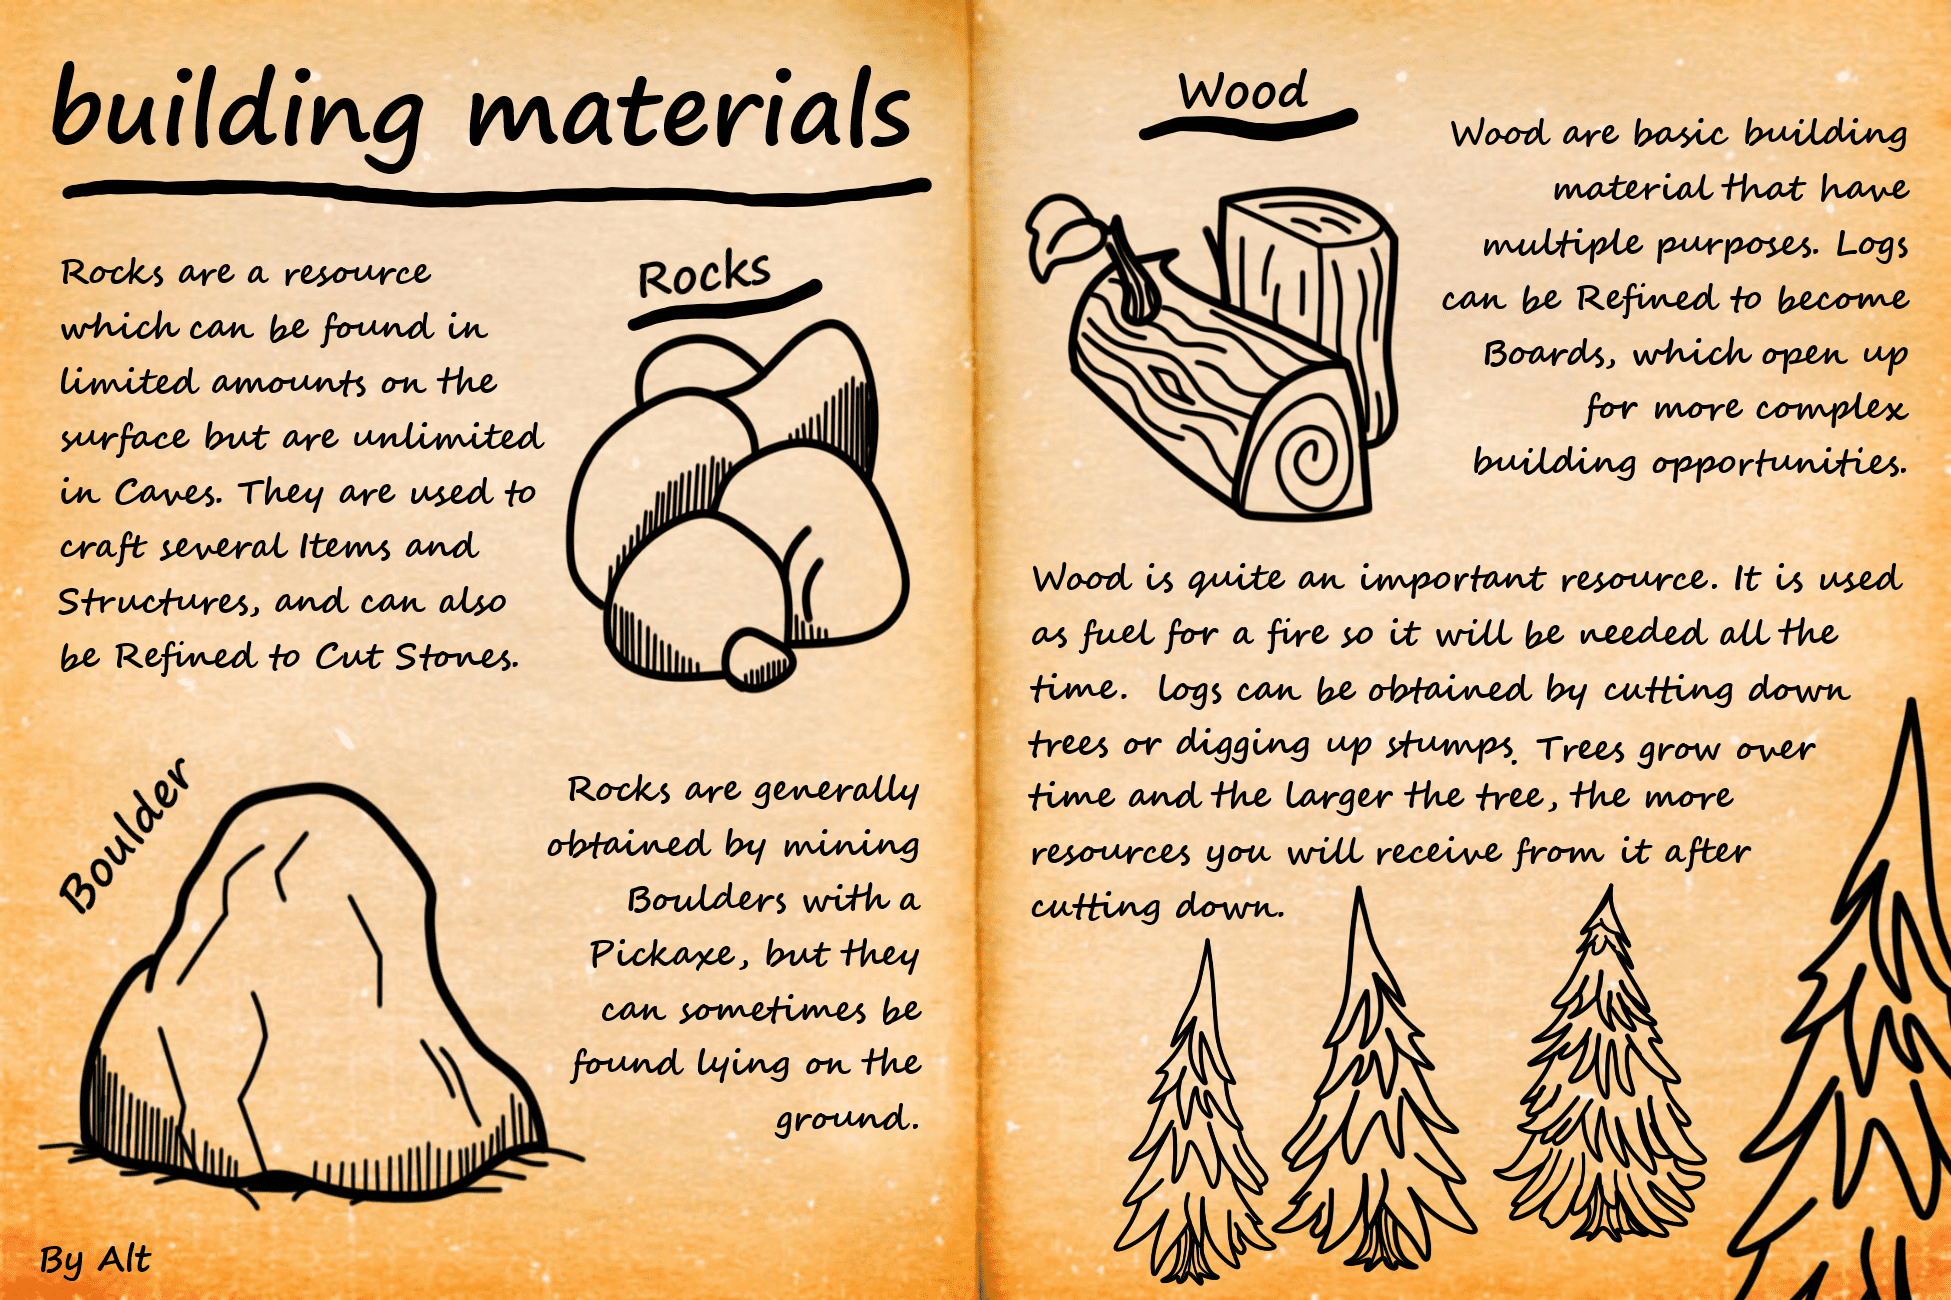 Don't Starve Together Survival Handbook Manual Guide Chapter 1 - building materials - 5E79465